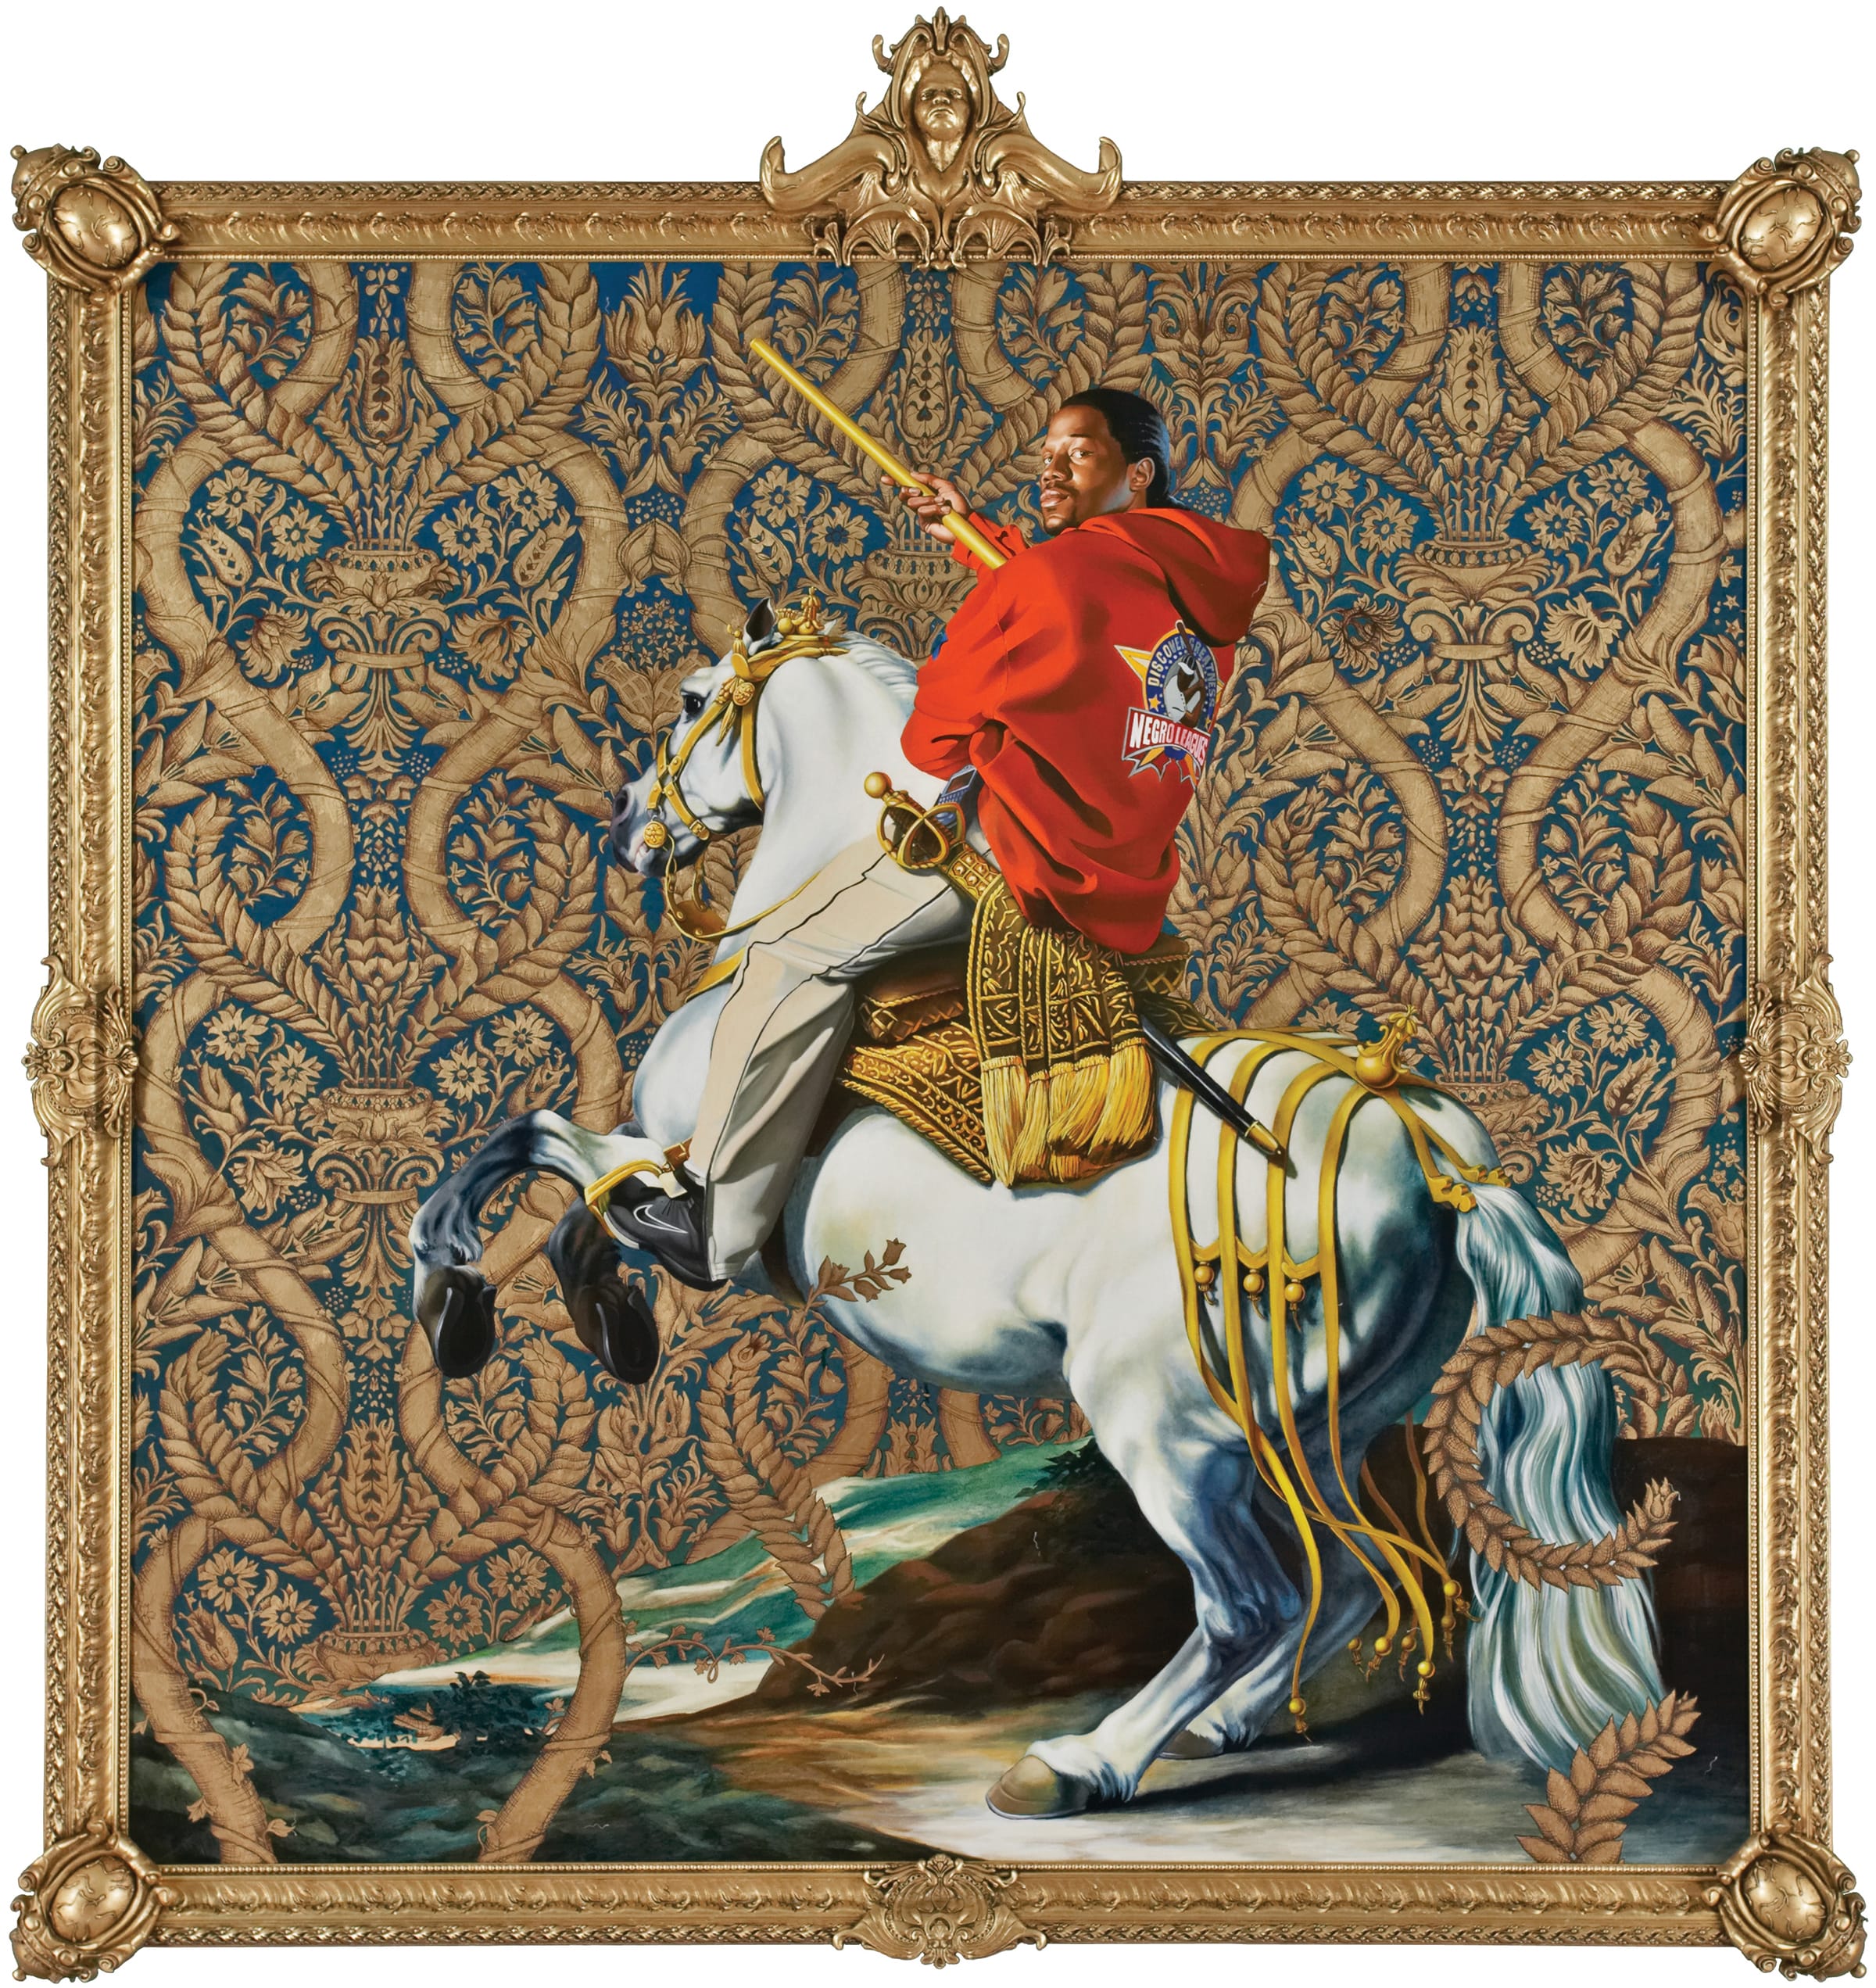 Kehinde Wiley, Equestrian Portrait of the Count Duke Olivares, 2005. Courtesy of the Rubell Museum DC.